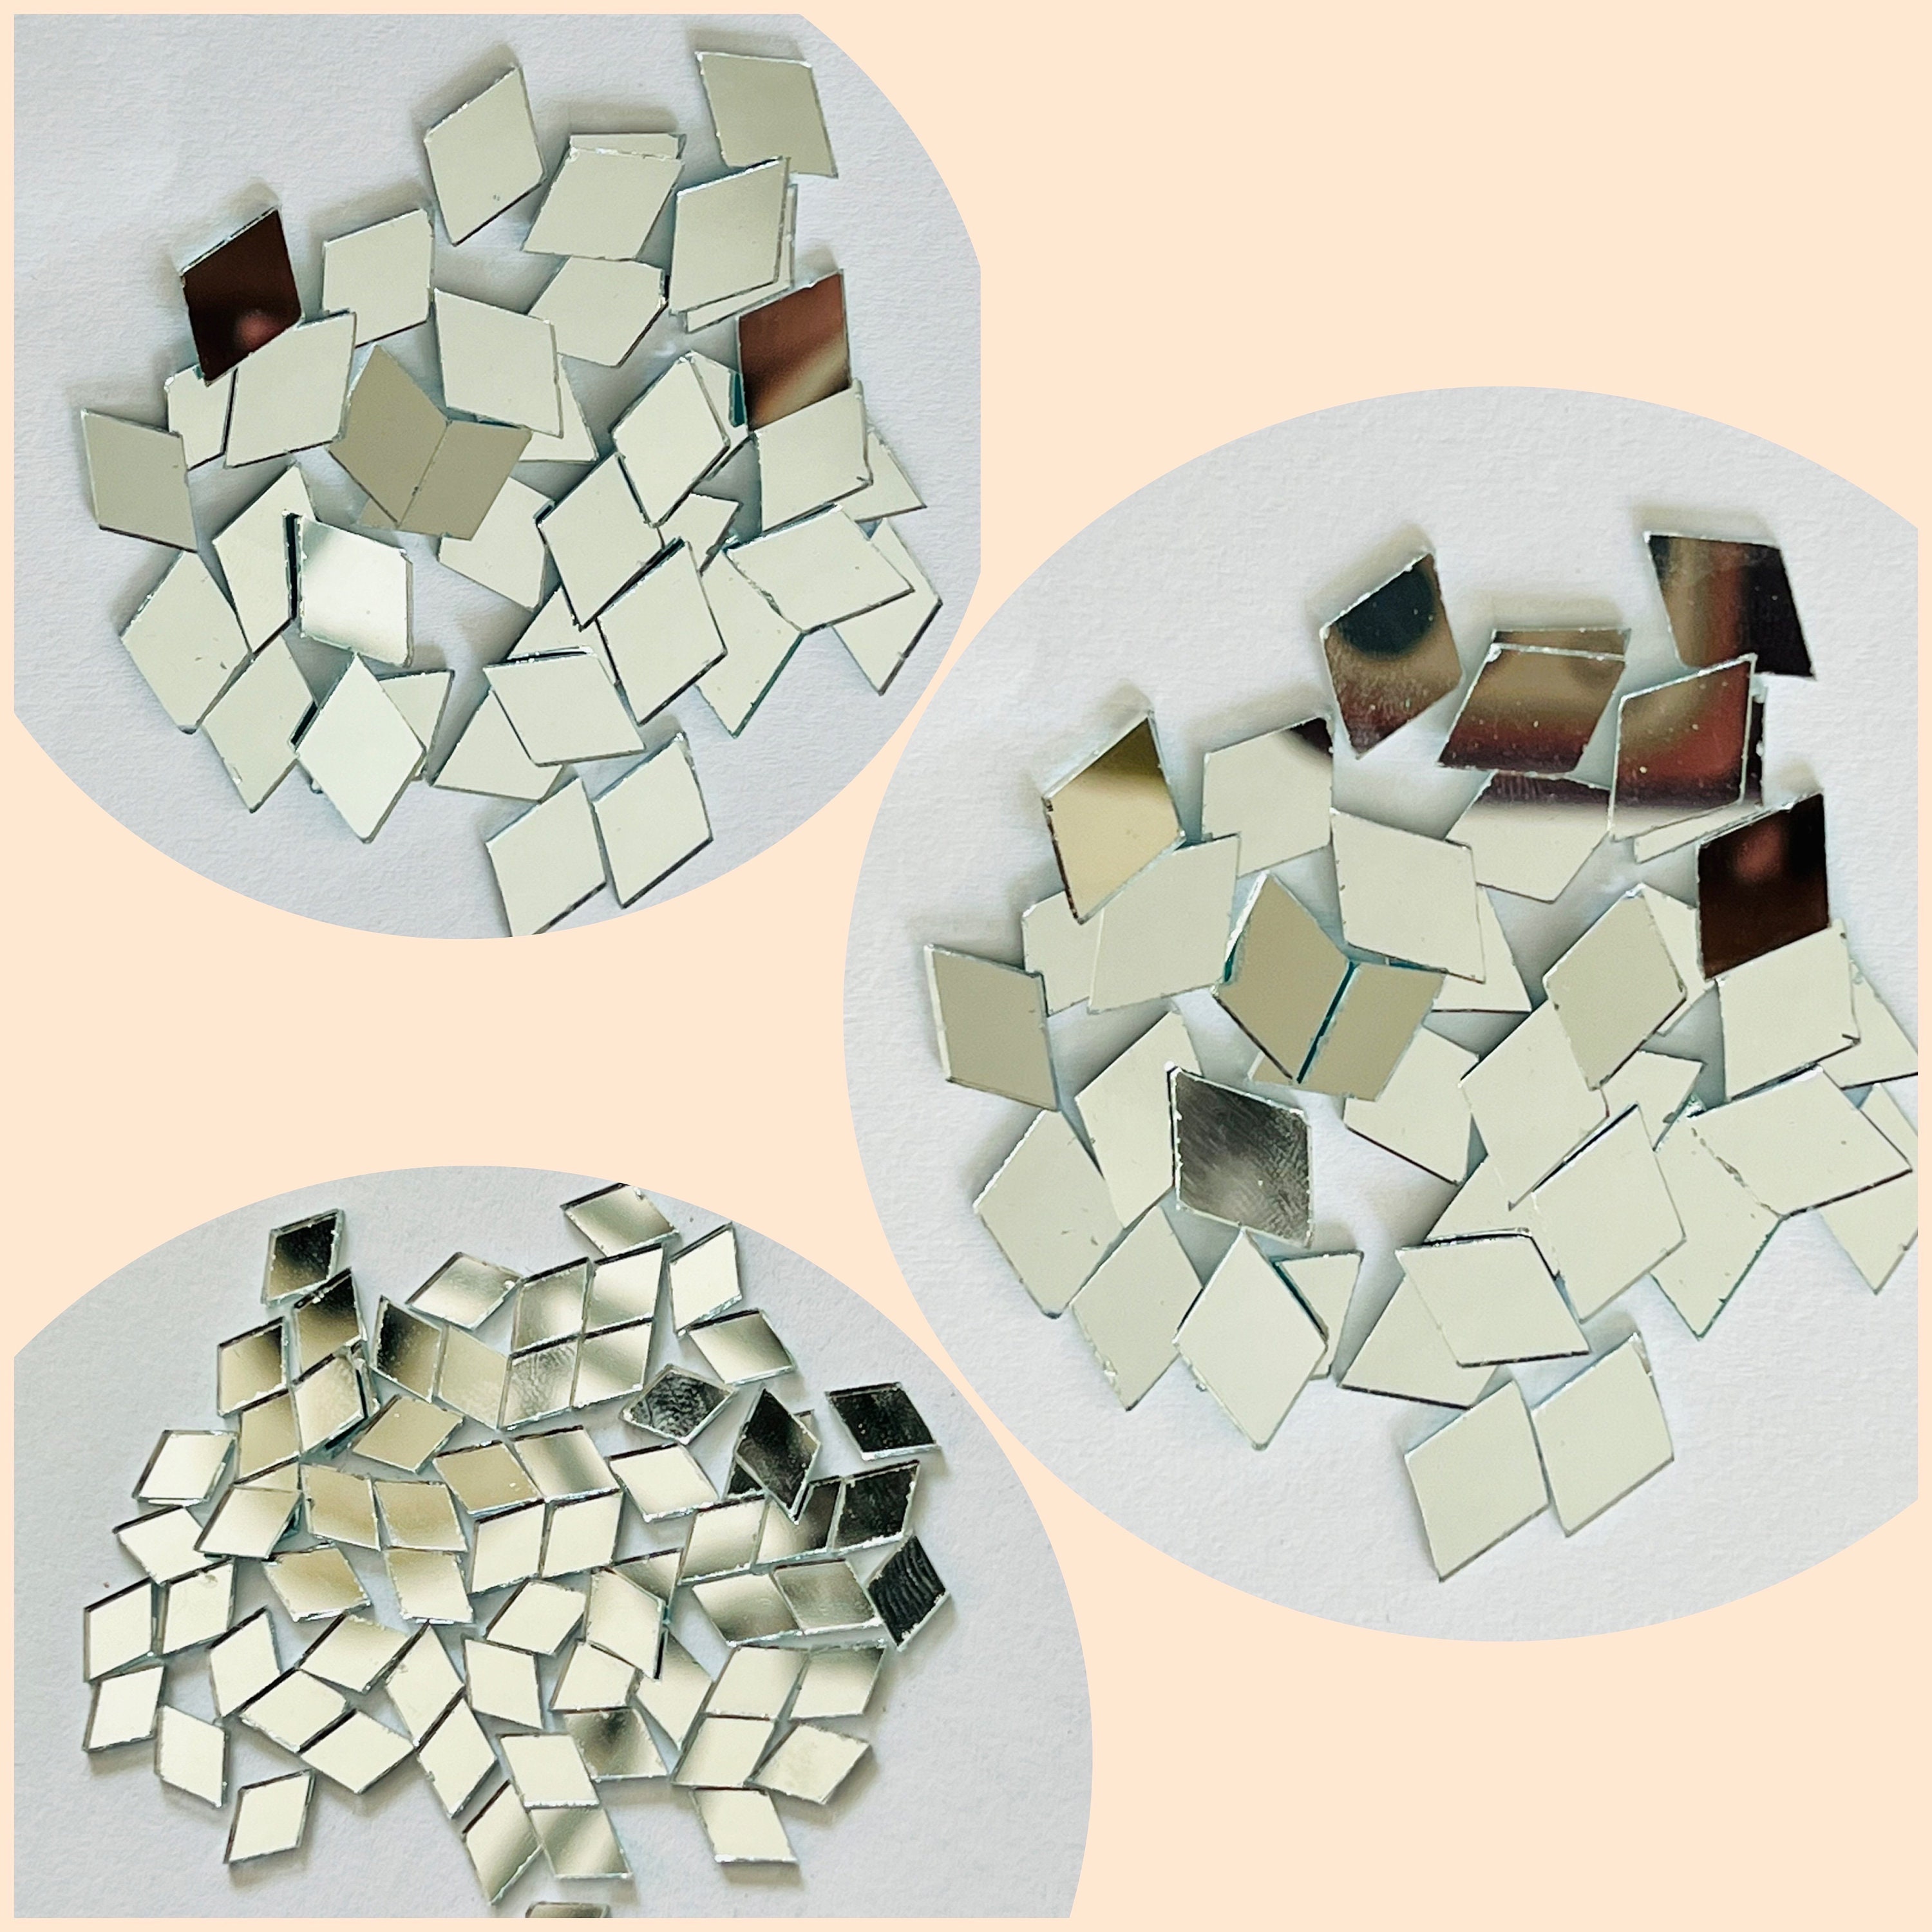 5 Mirror Tile Squares 3 X 3 Inch Square Shape Real GLASS Small Craft  Crafting MIRRORS 242412 